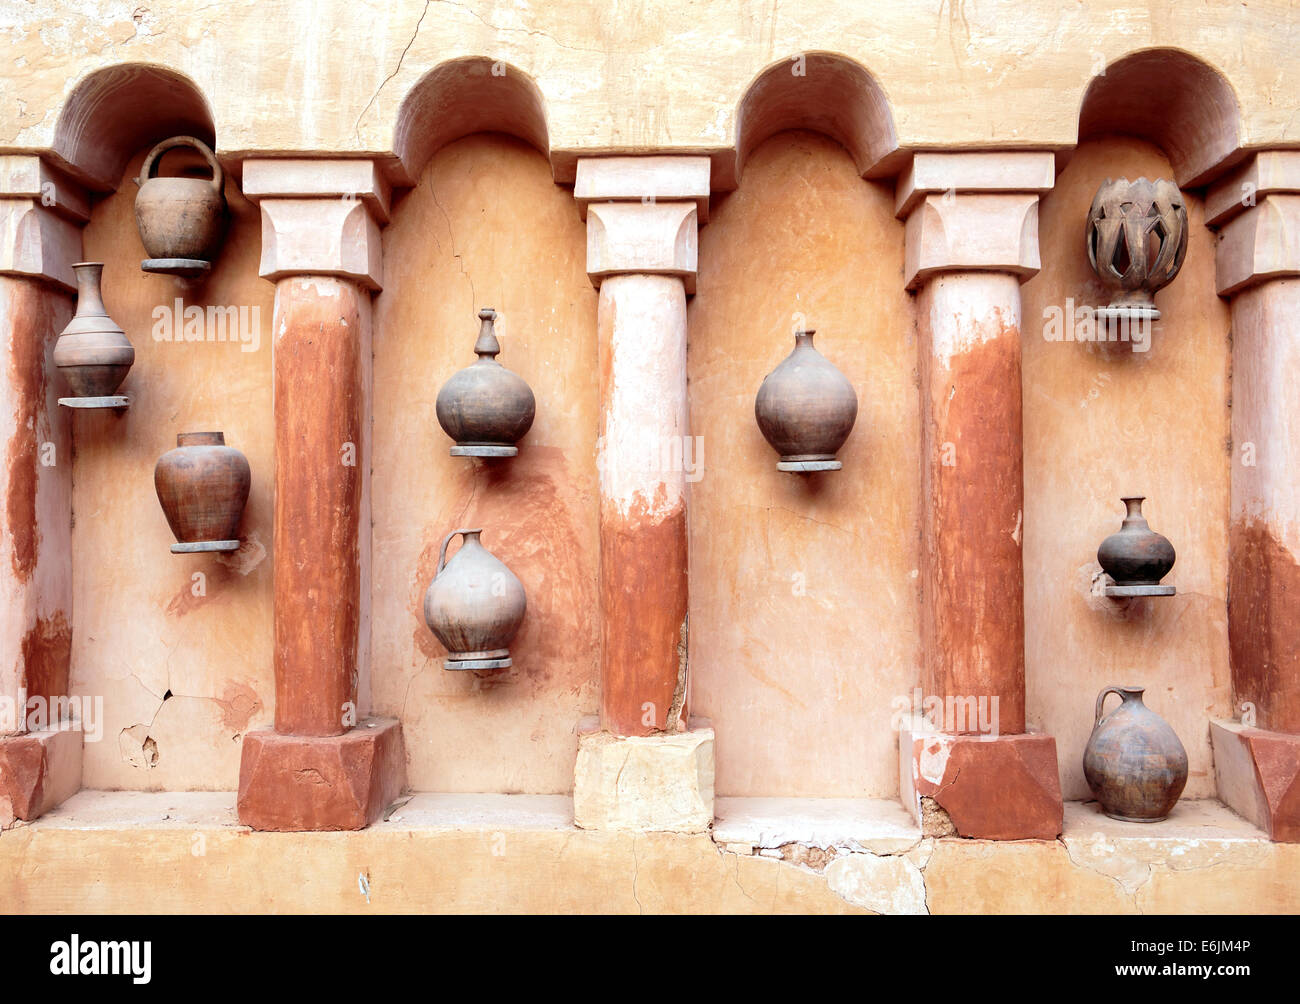 Old earthenware crockery and set of arches in Agadir, Morocco Stock Photo